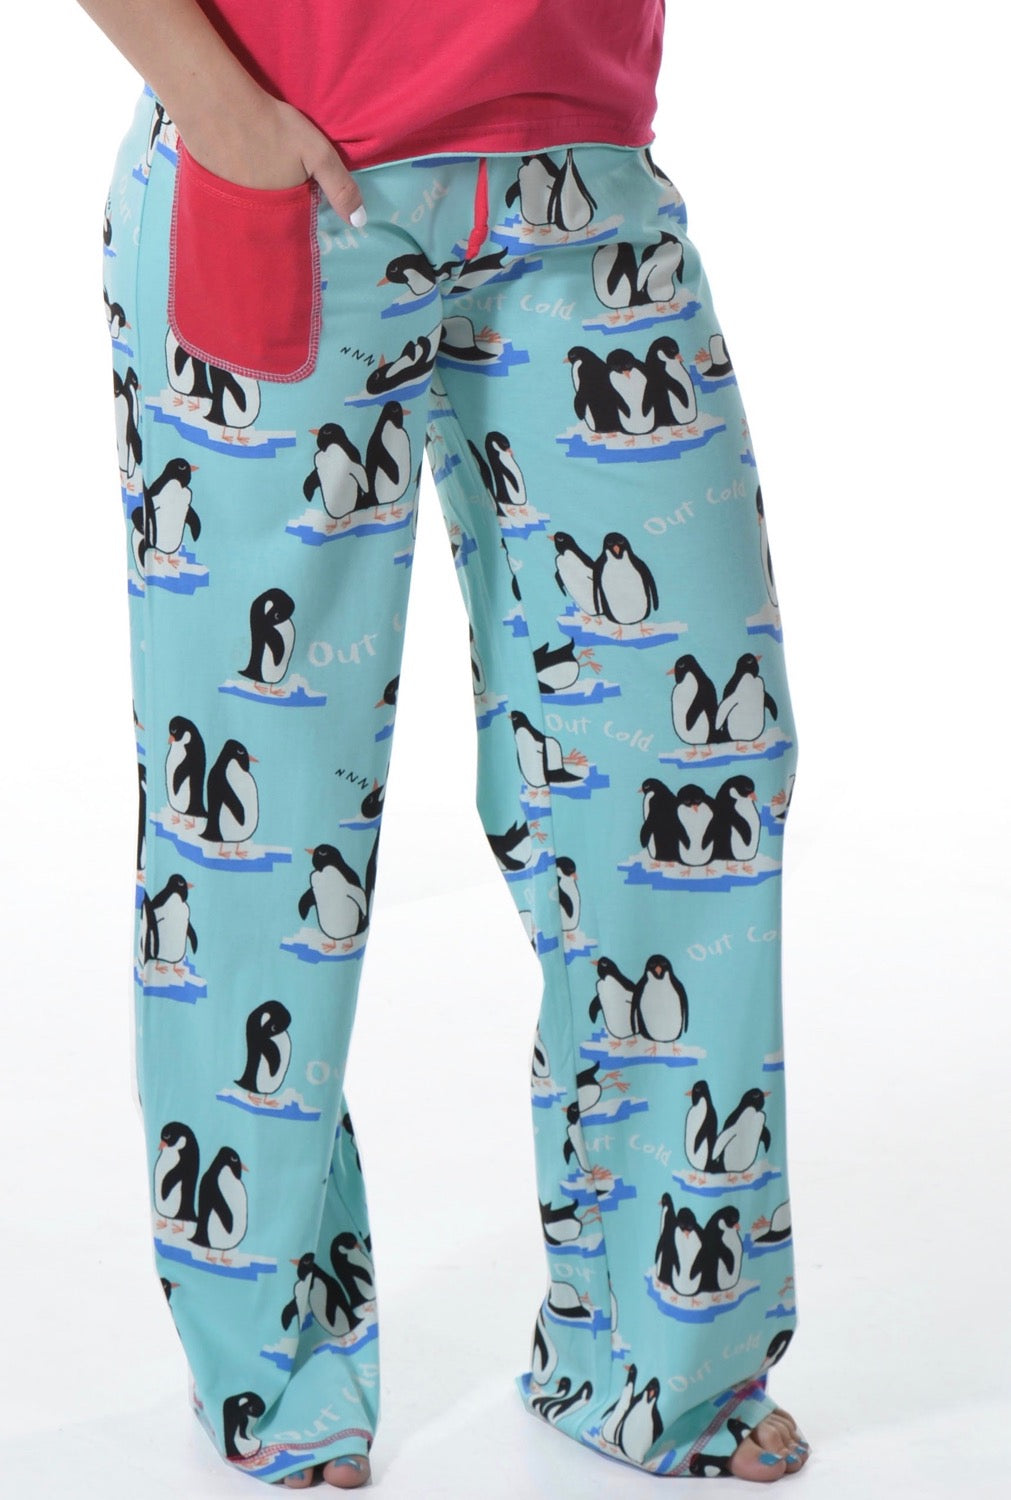 Out Cold Penguin Women's Fitted Pant